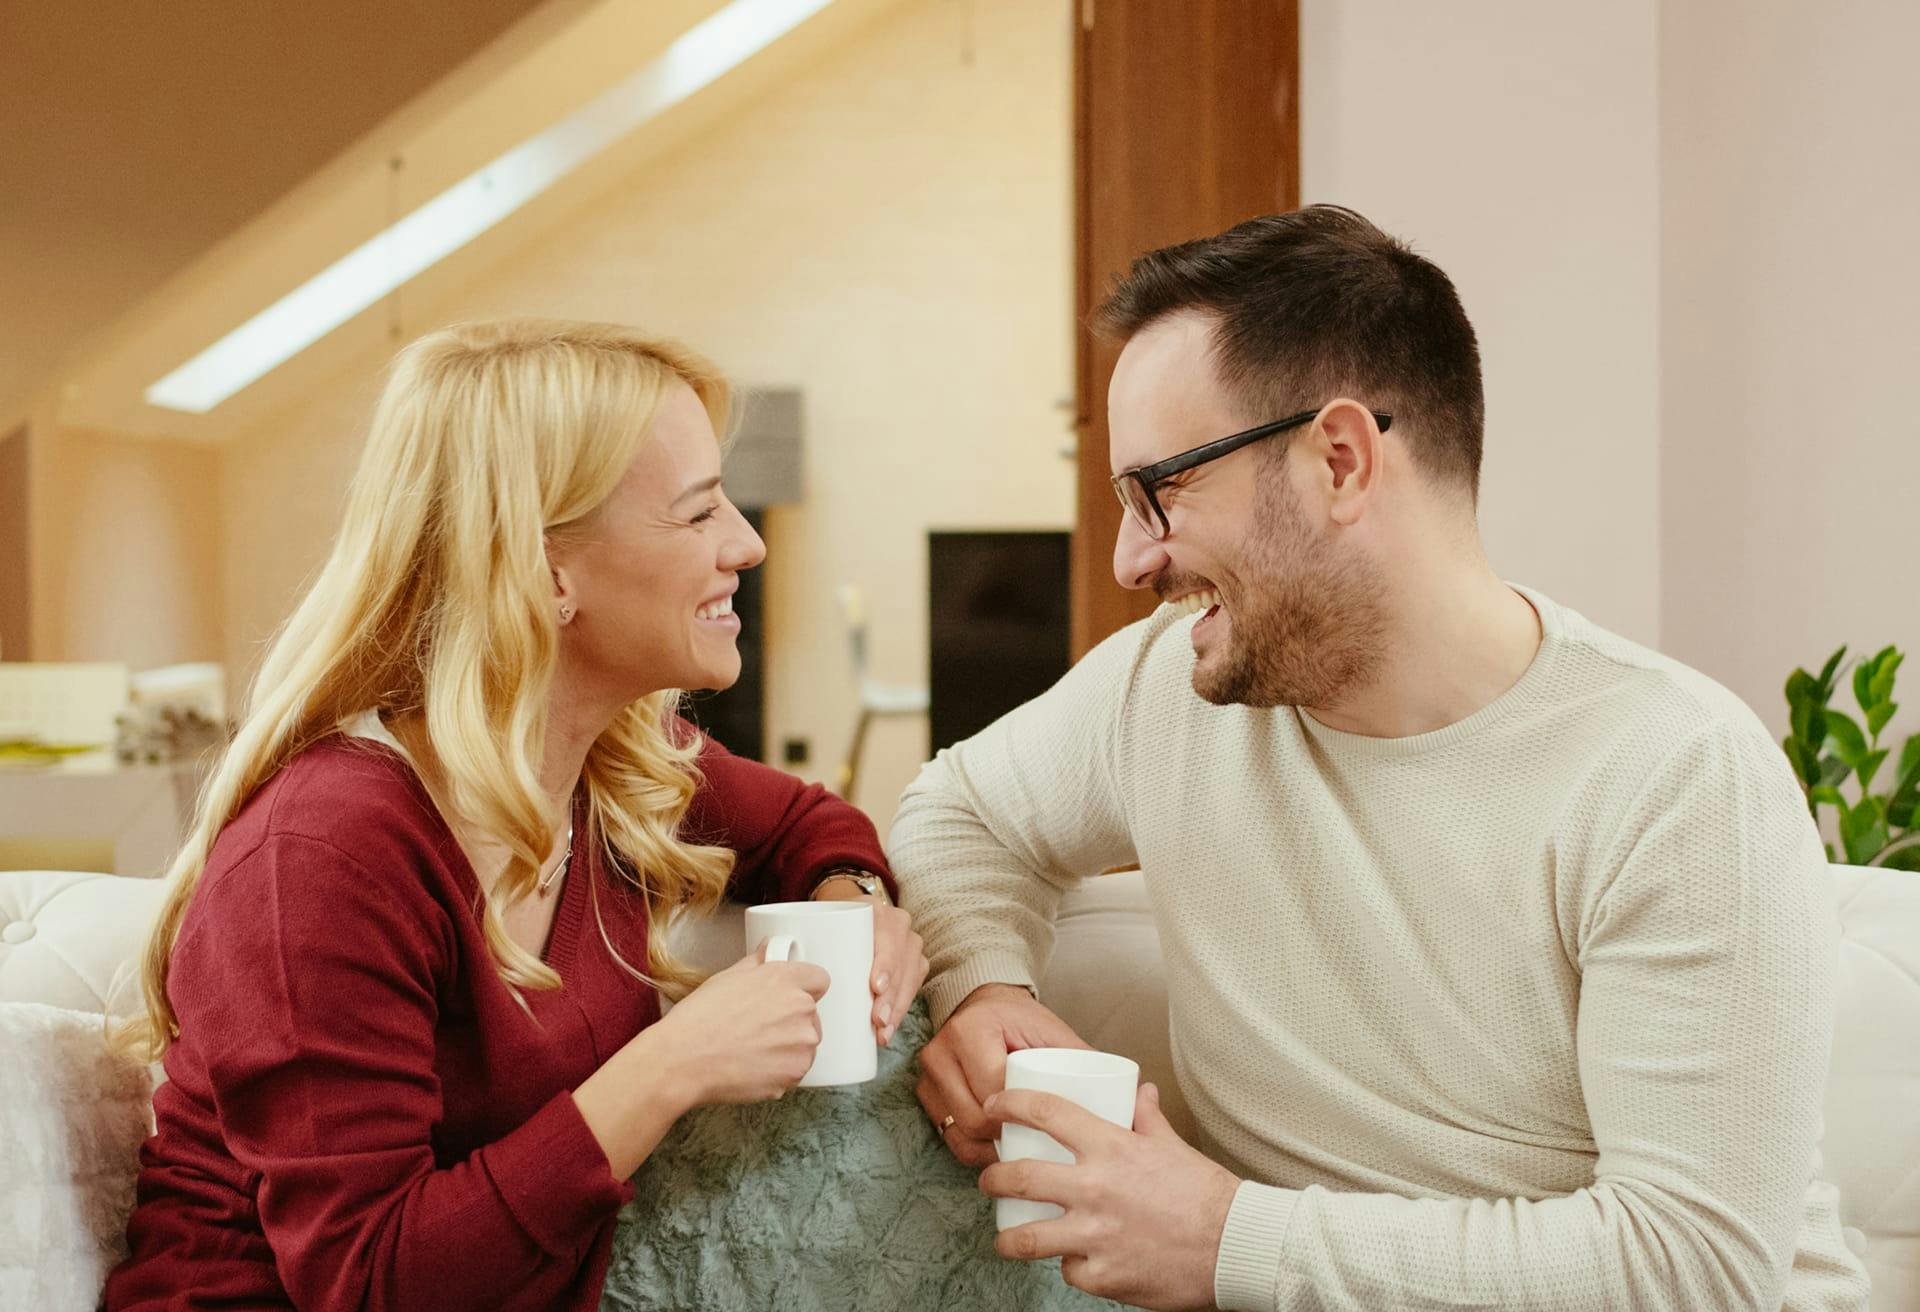 Man and woman sharing coffee together on a couch